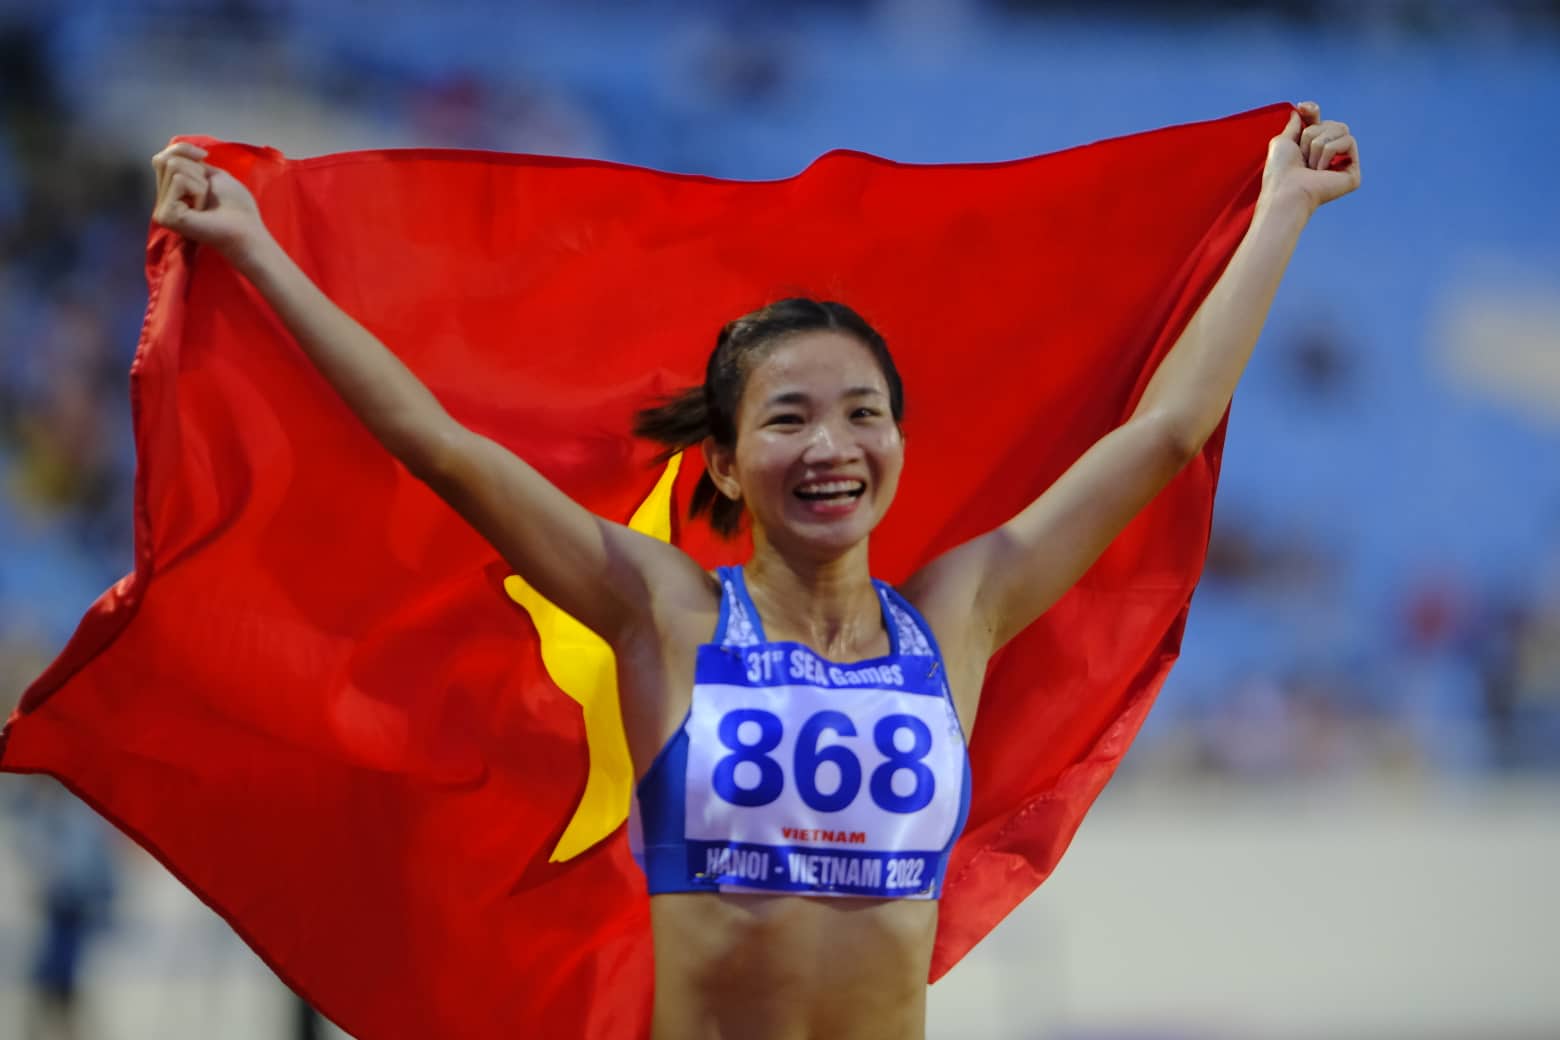 Nguyen Thi Oanh celebrates her gold medal for the Vietnamese athletics team at the 31st Southeast Asian (SEA) Games in Vietnam, May 2022. Photo: Nam Tran / Tuoi Tre